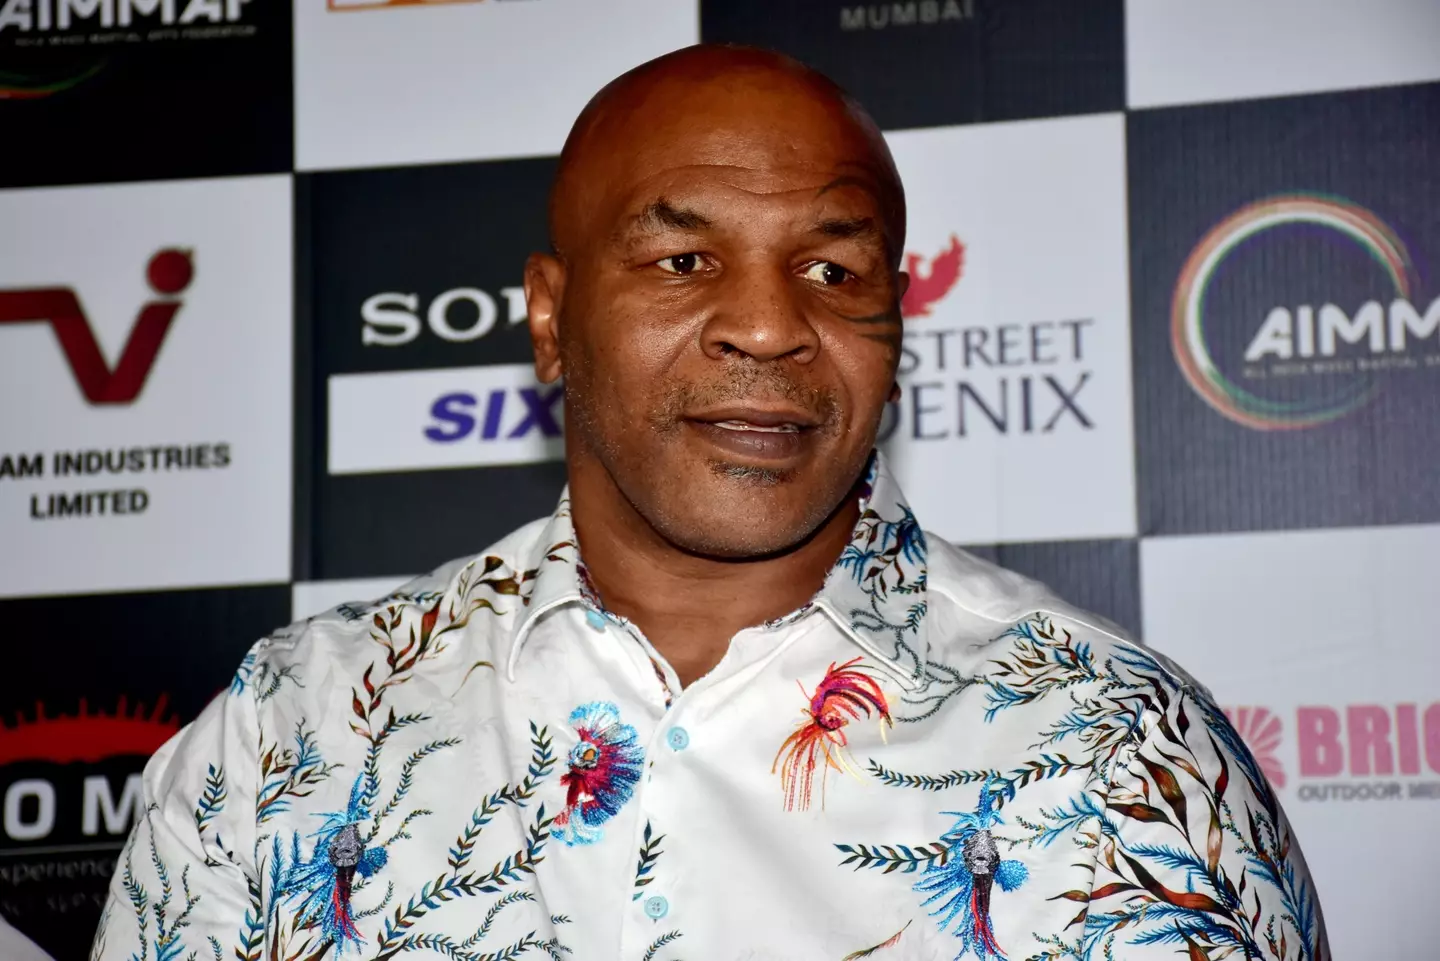 Mike Tyson left the aircraft following the altercation.